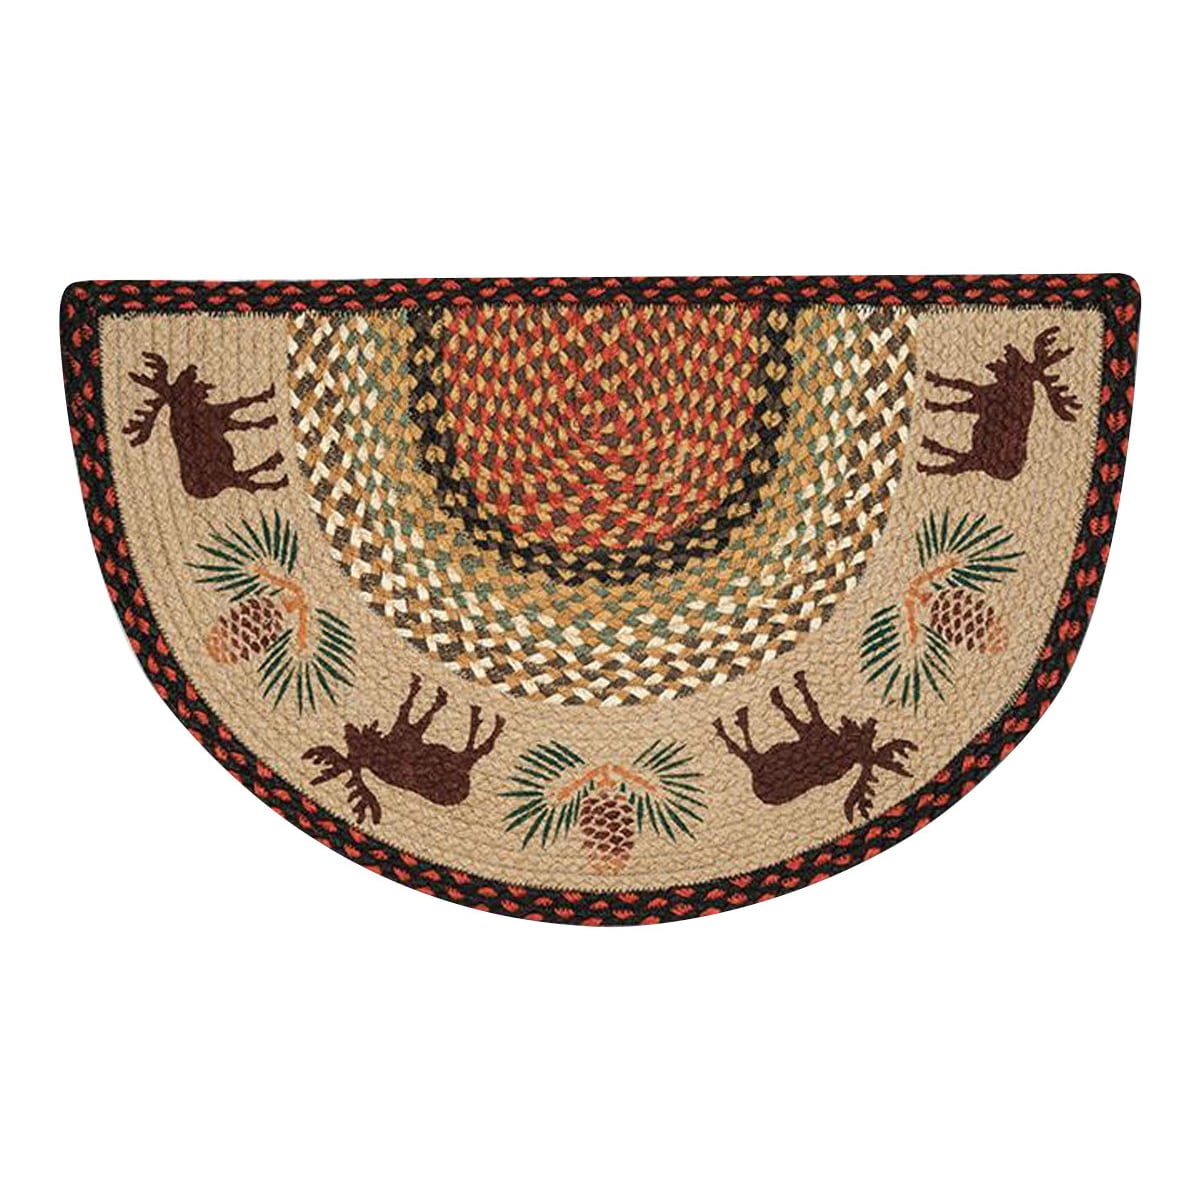 Picture of Capitol Importing 32-019MP 18 x 29 in. Moose & Pinecone Printed Slice Rug